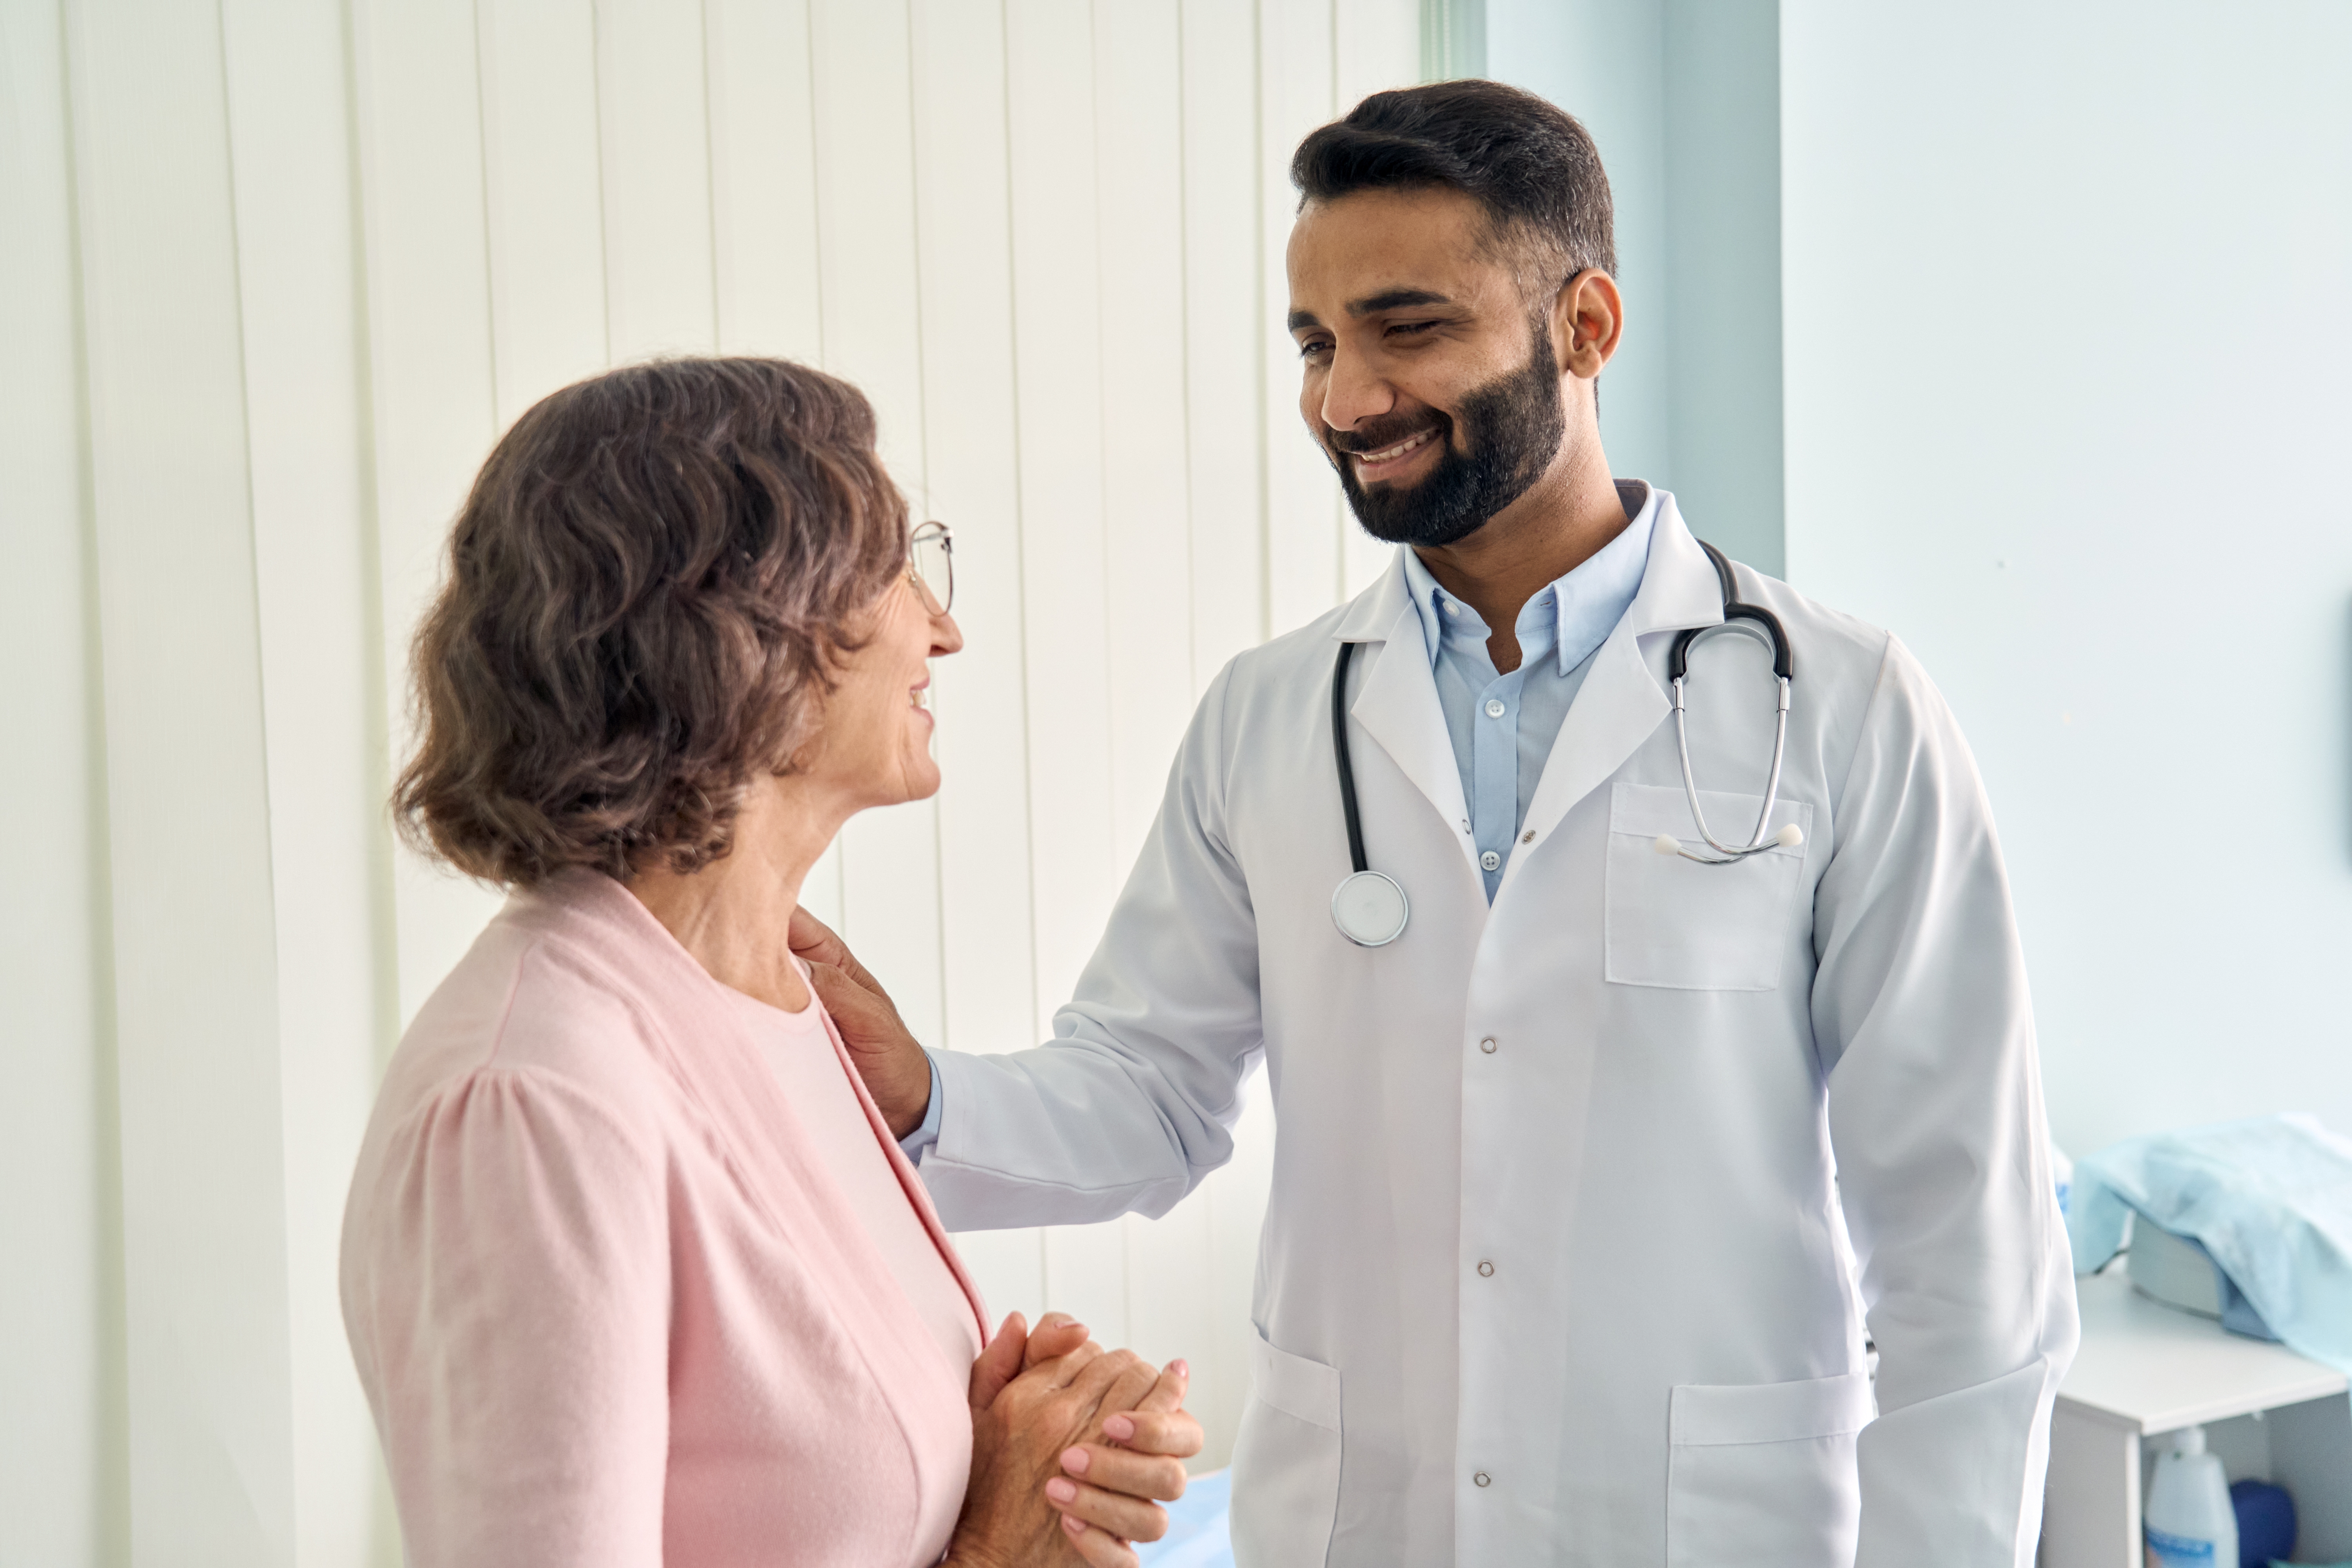 Doctor talks to patient in the hall | Source: Shutterstock